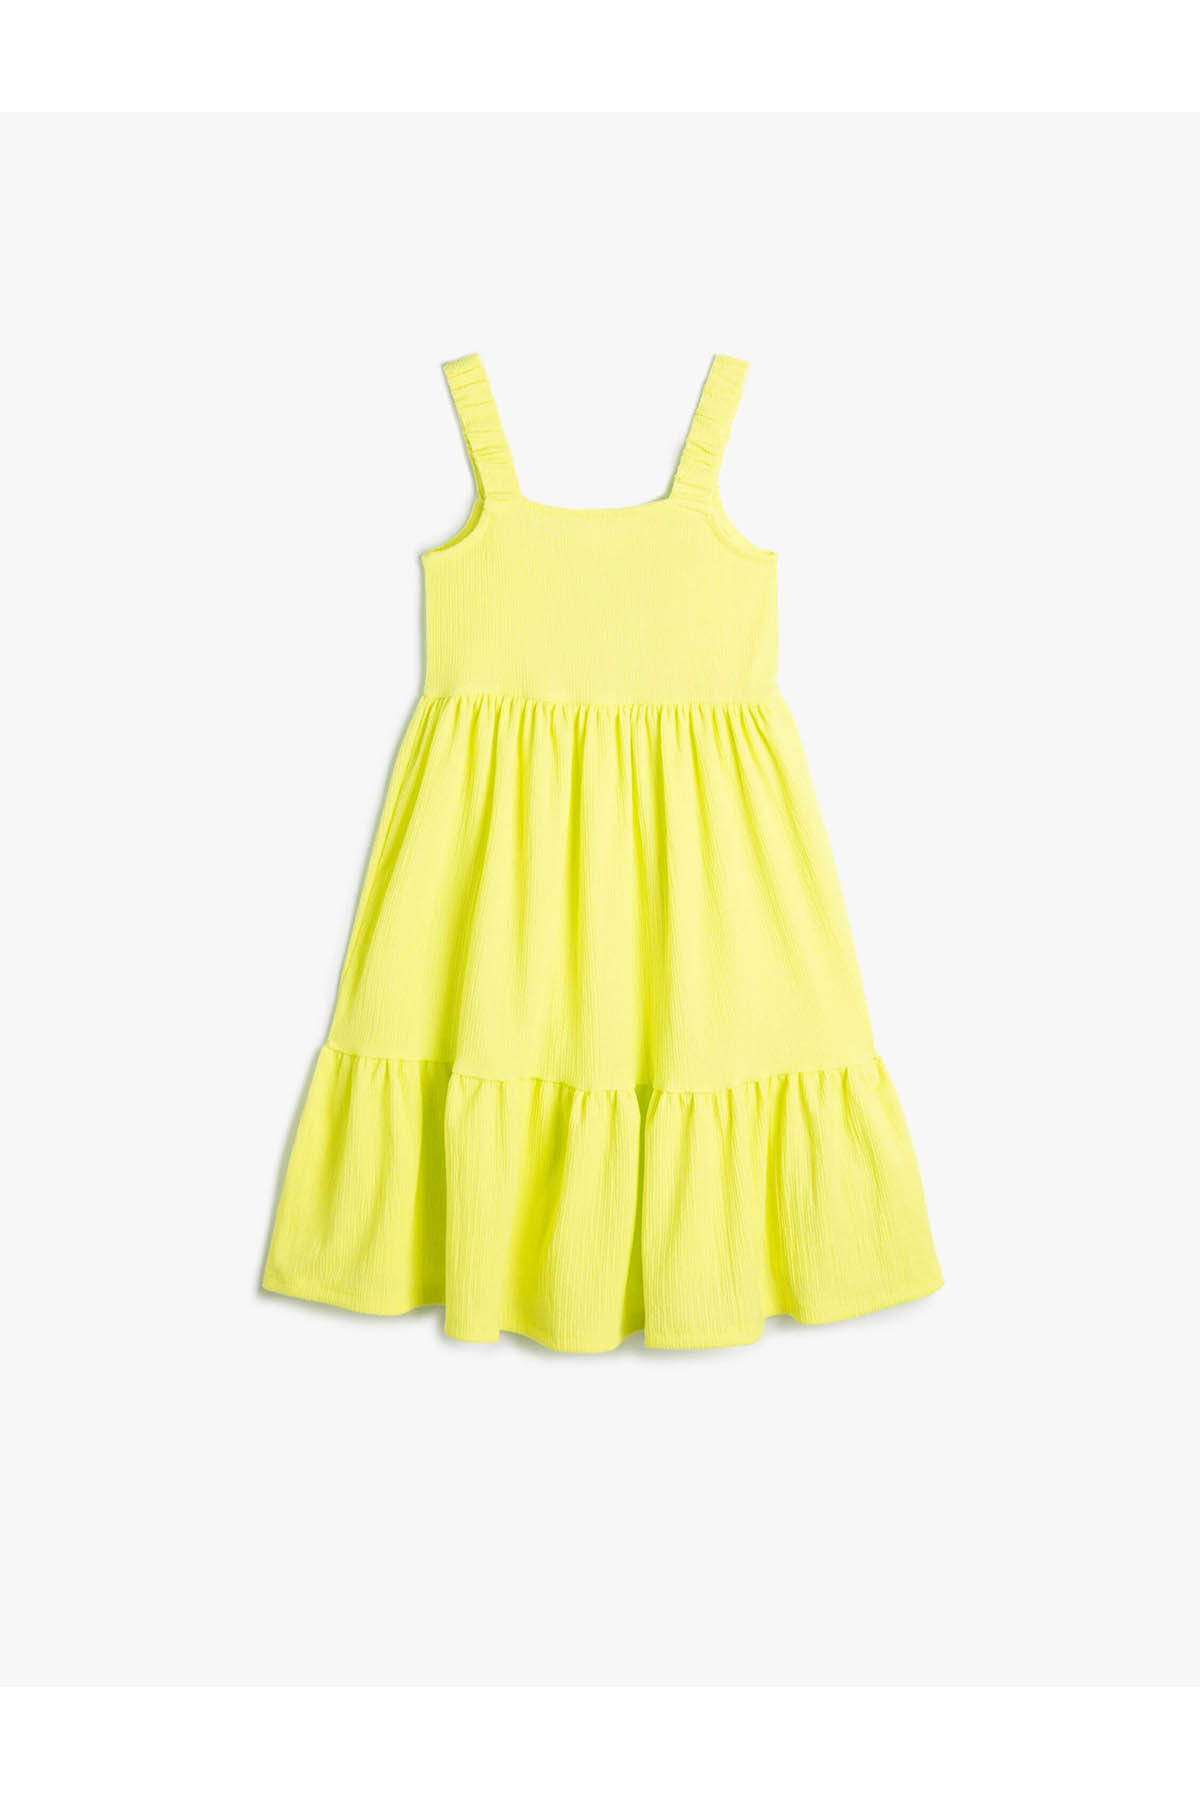 Levně Koton Dress With Thin Straps, Tiered Ruffle Detailed Dress.